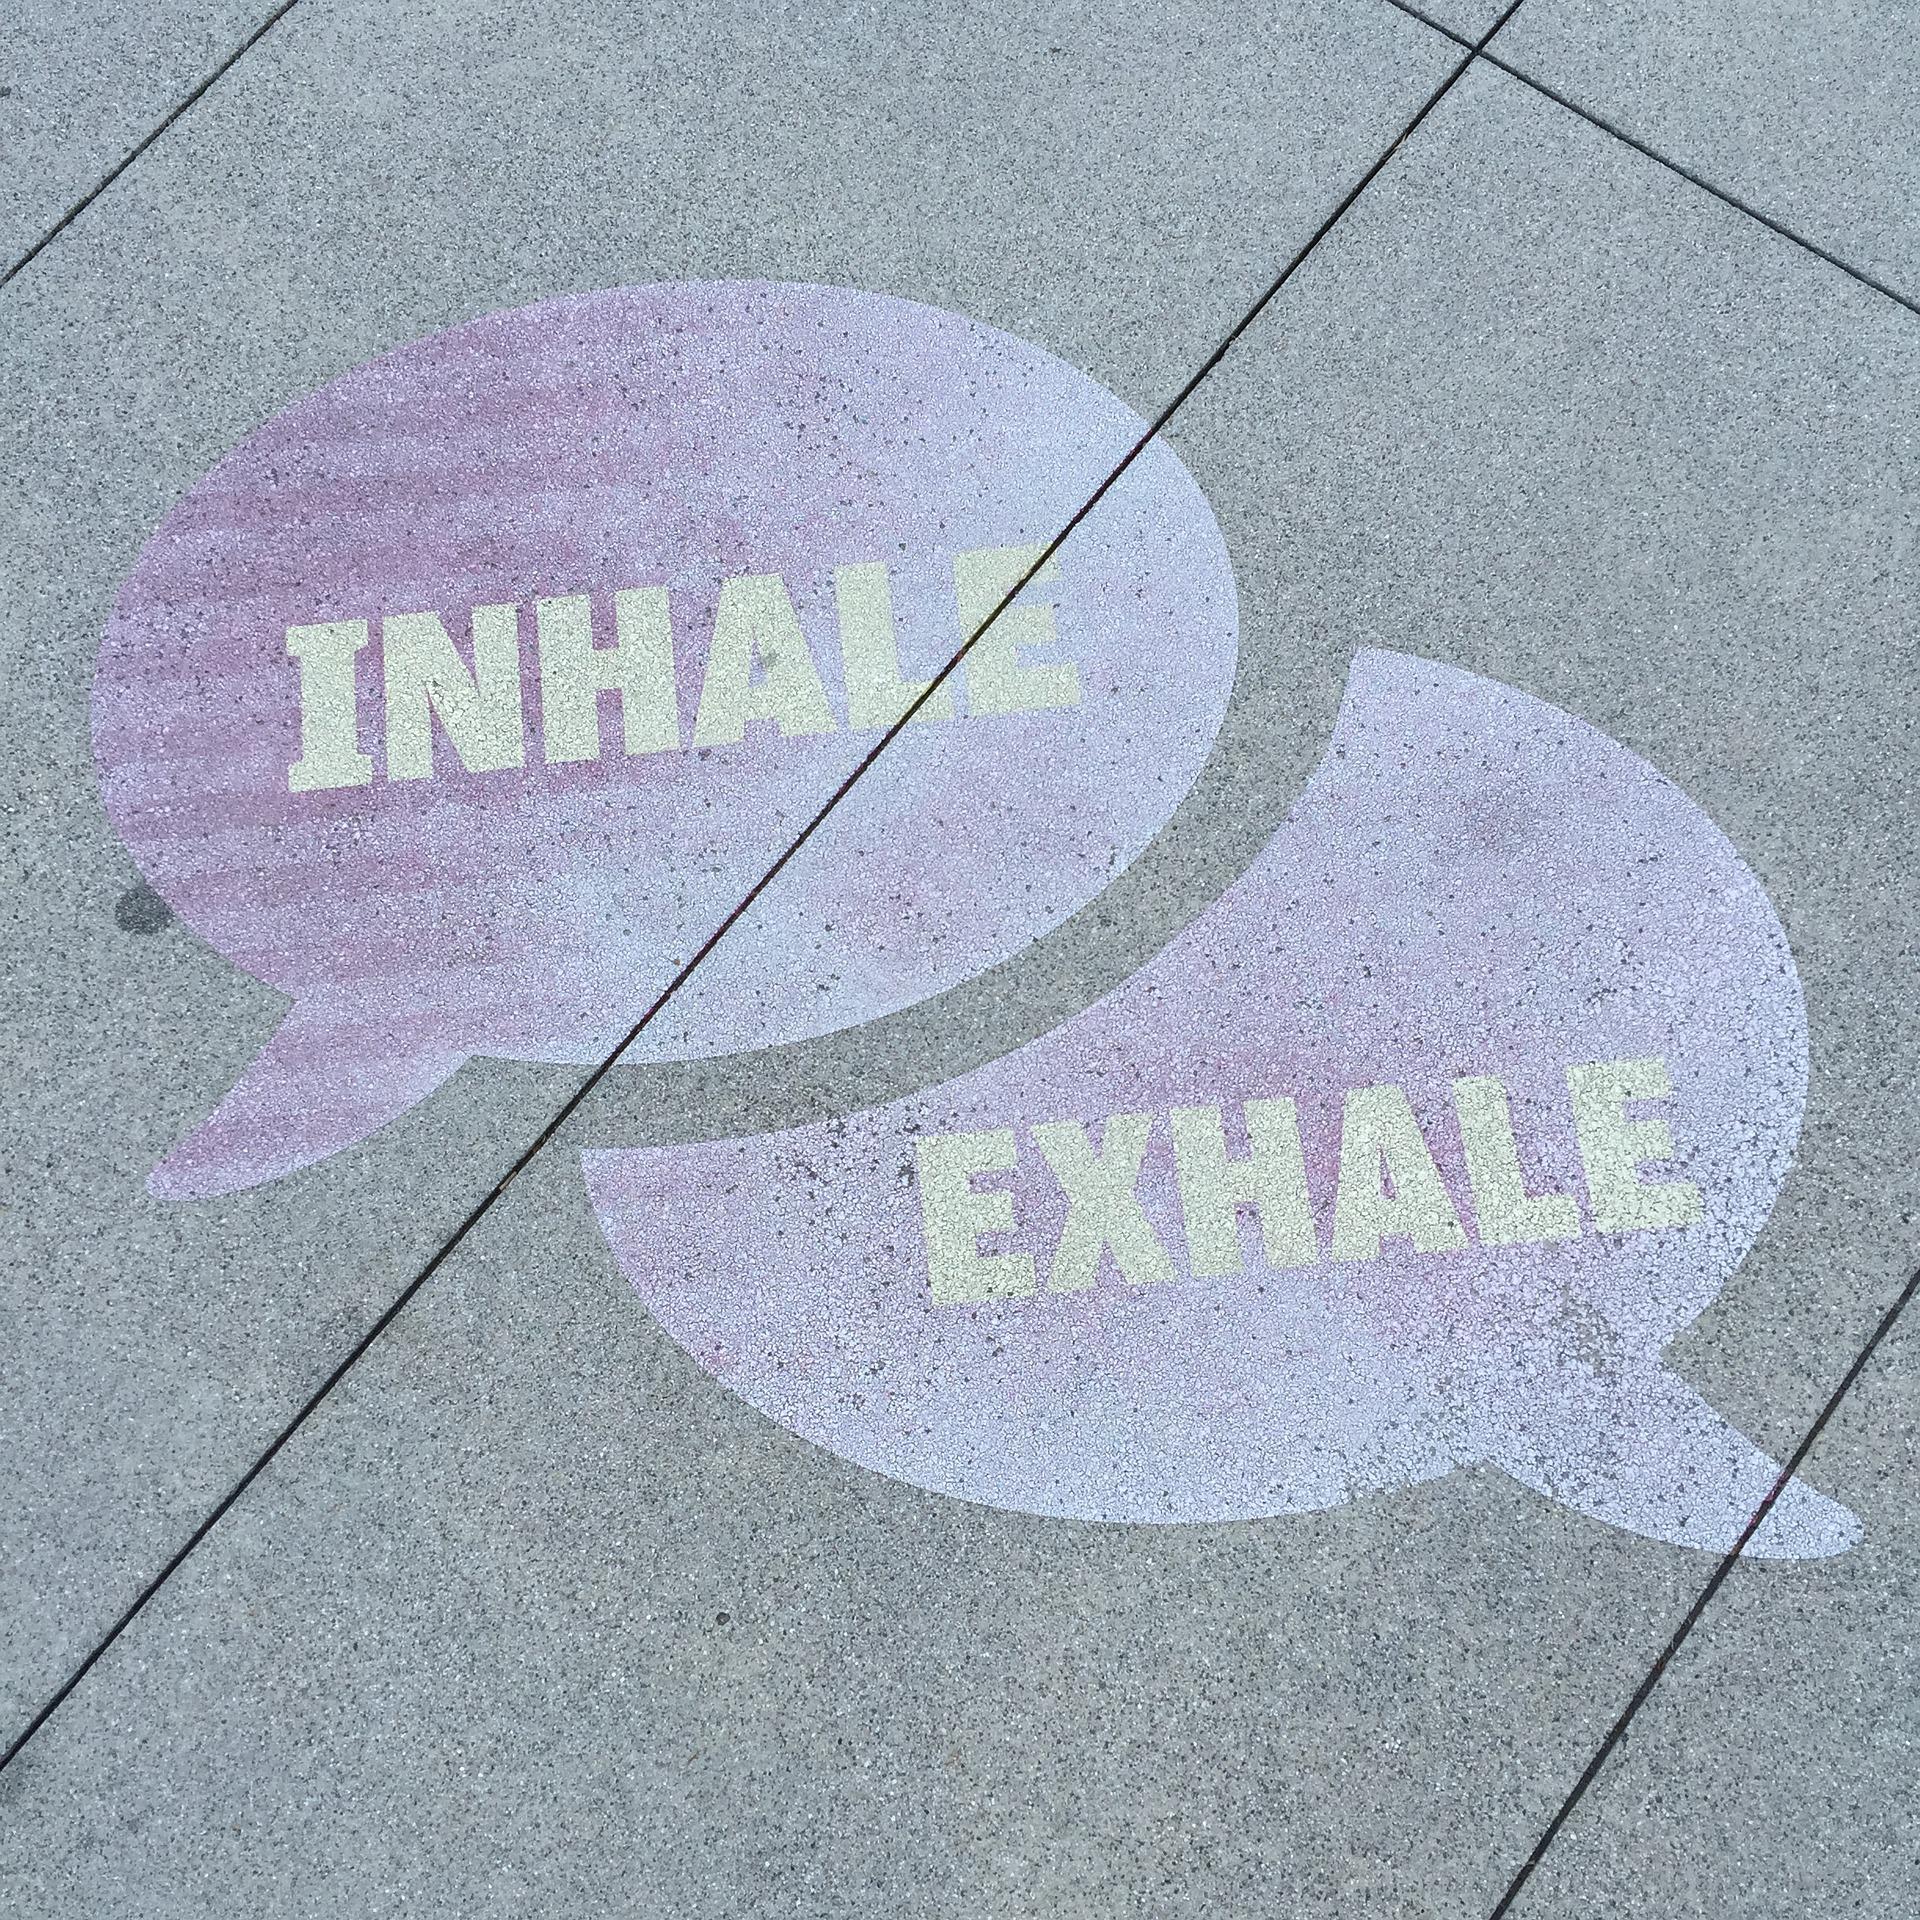 inhale and exhale drawn on the floor